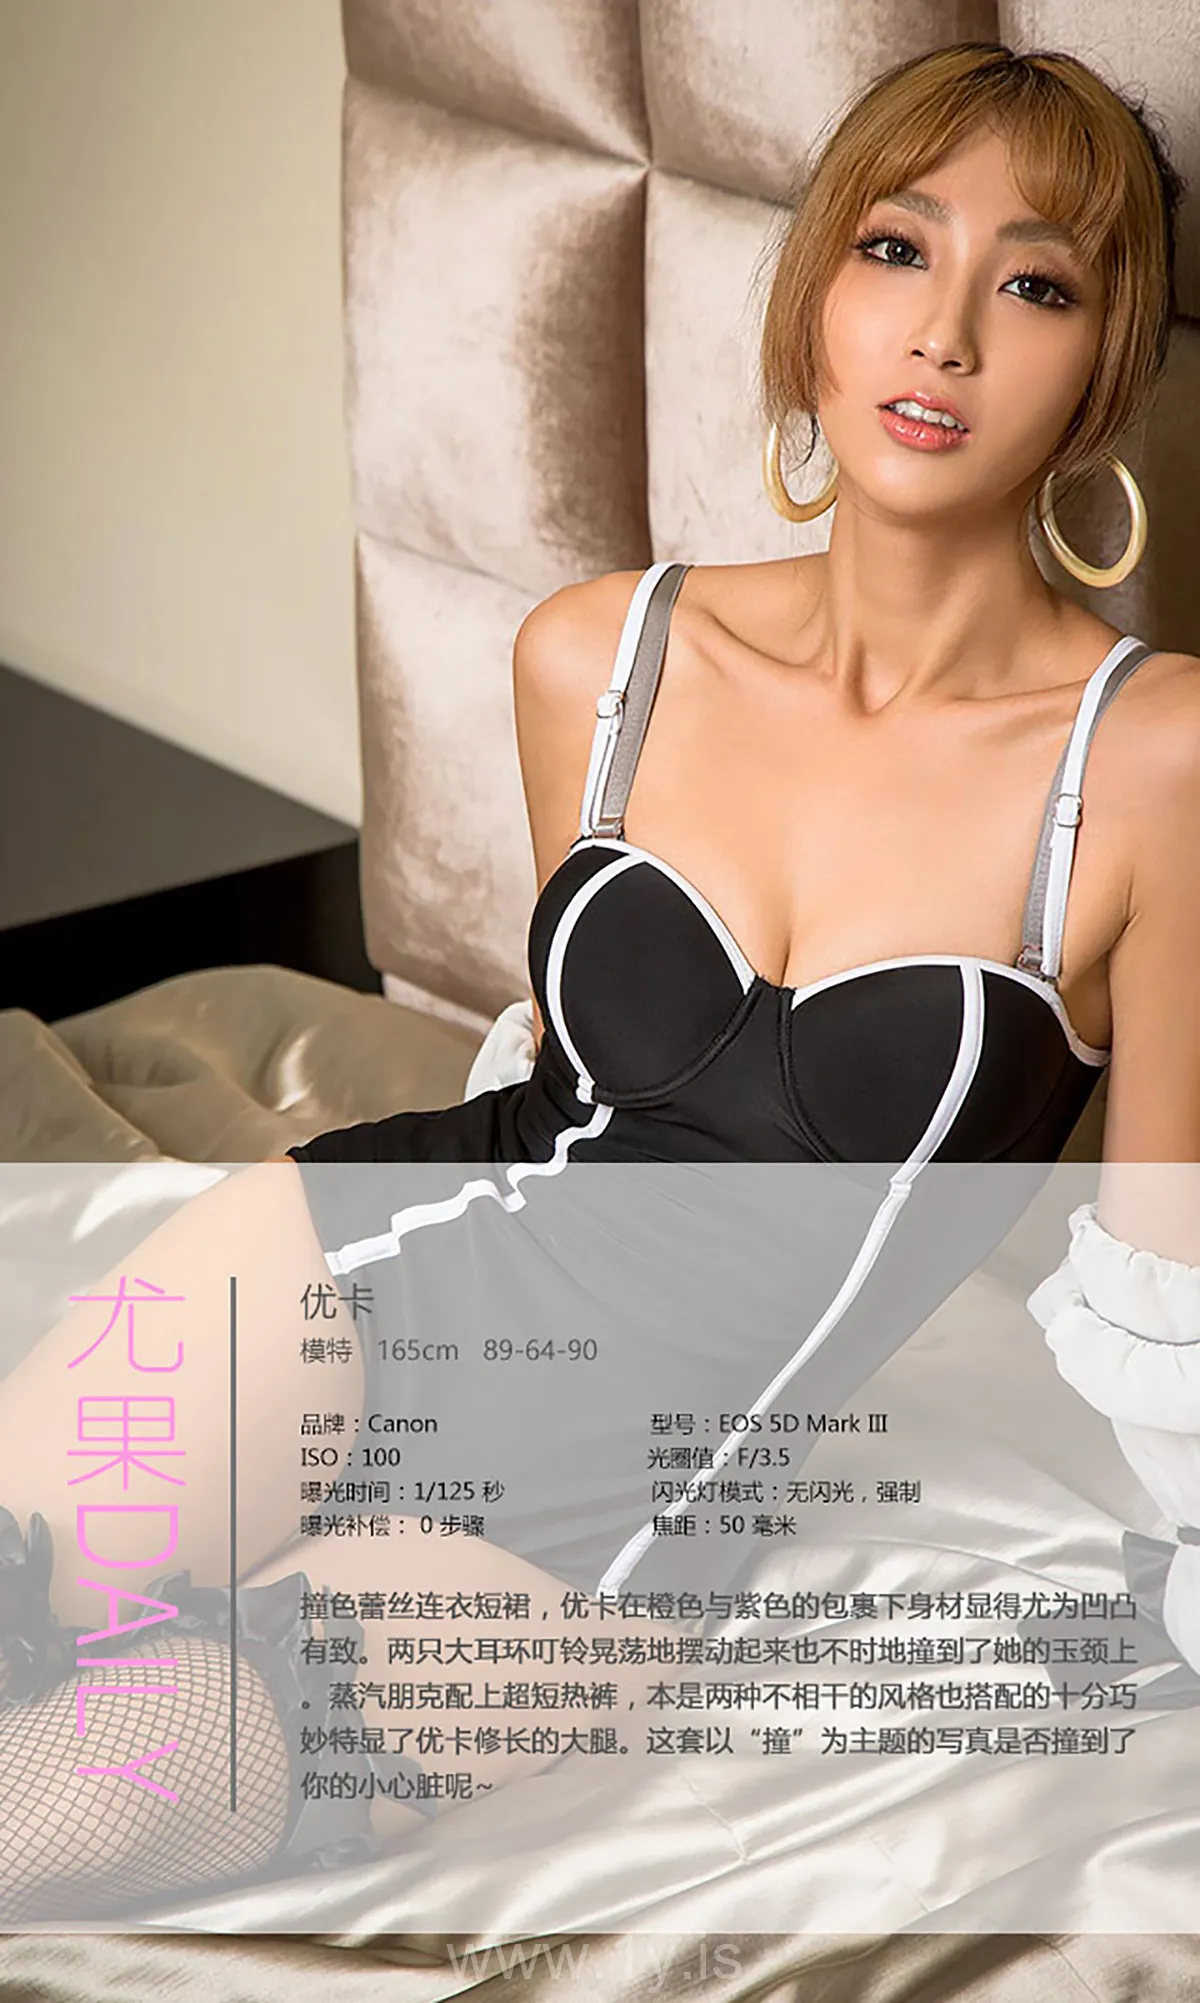 UGIRLS NO.422 Knockout & Nice-looking Chinese Homebody Girl 优卡